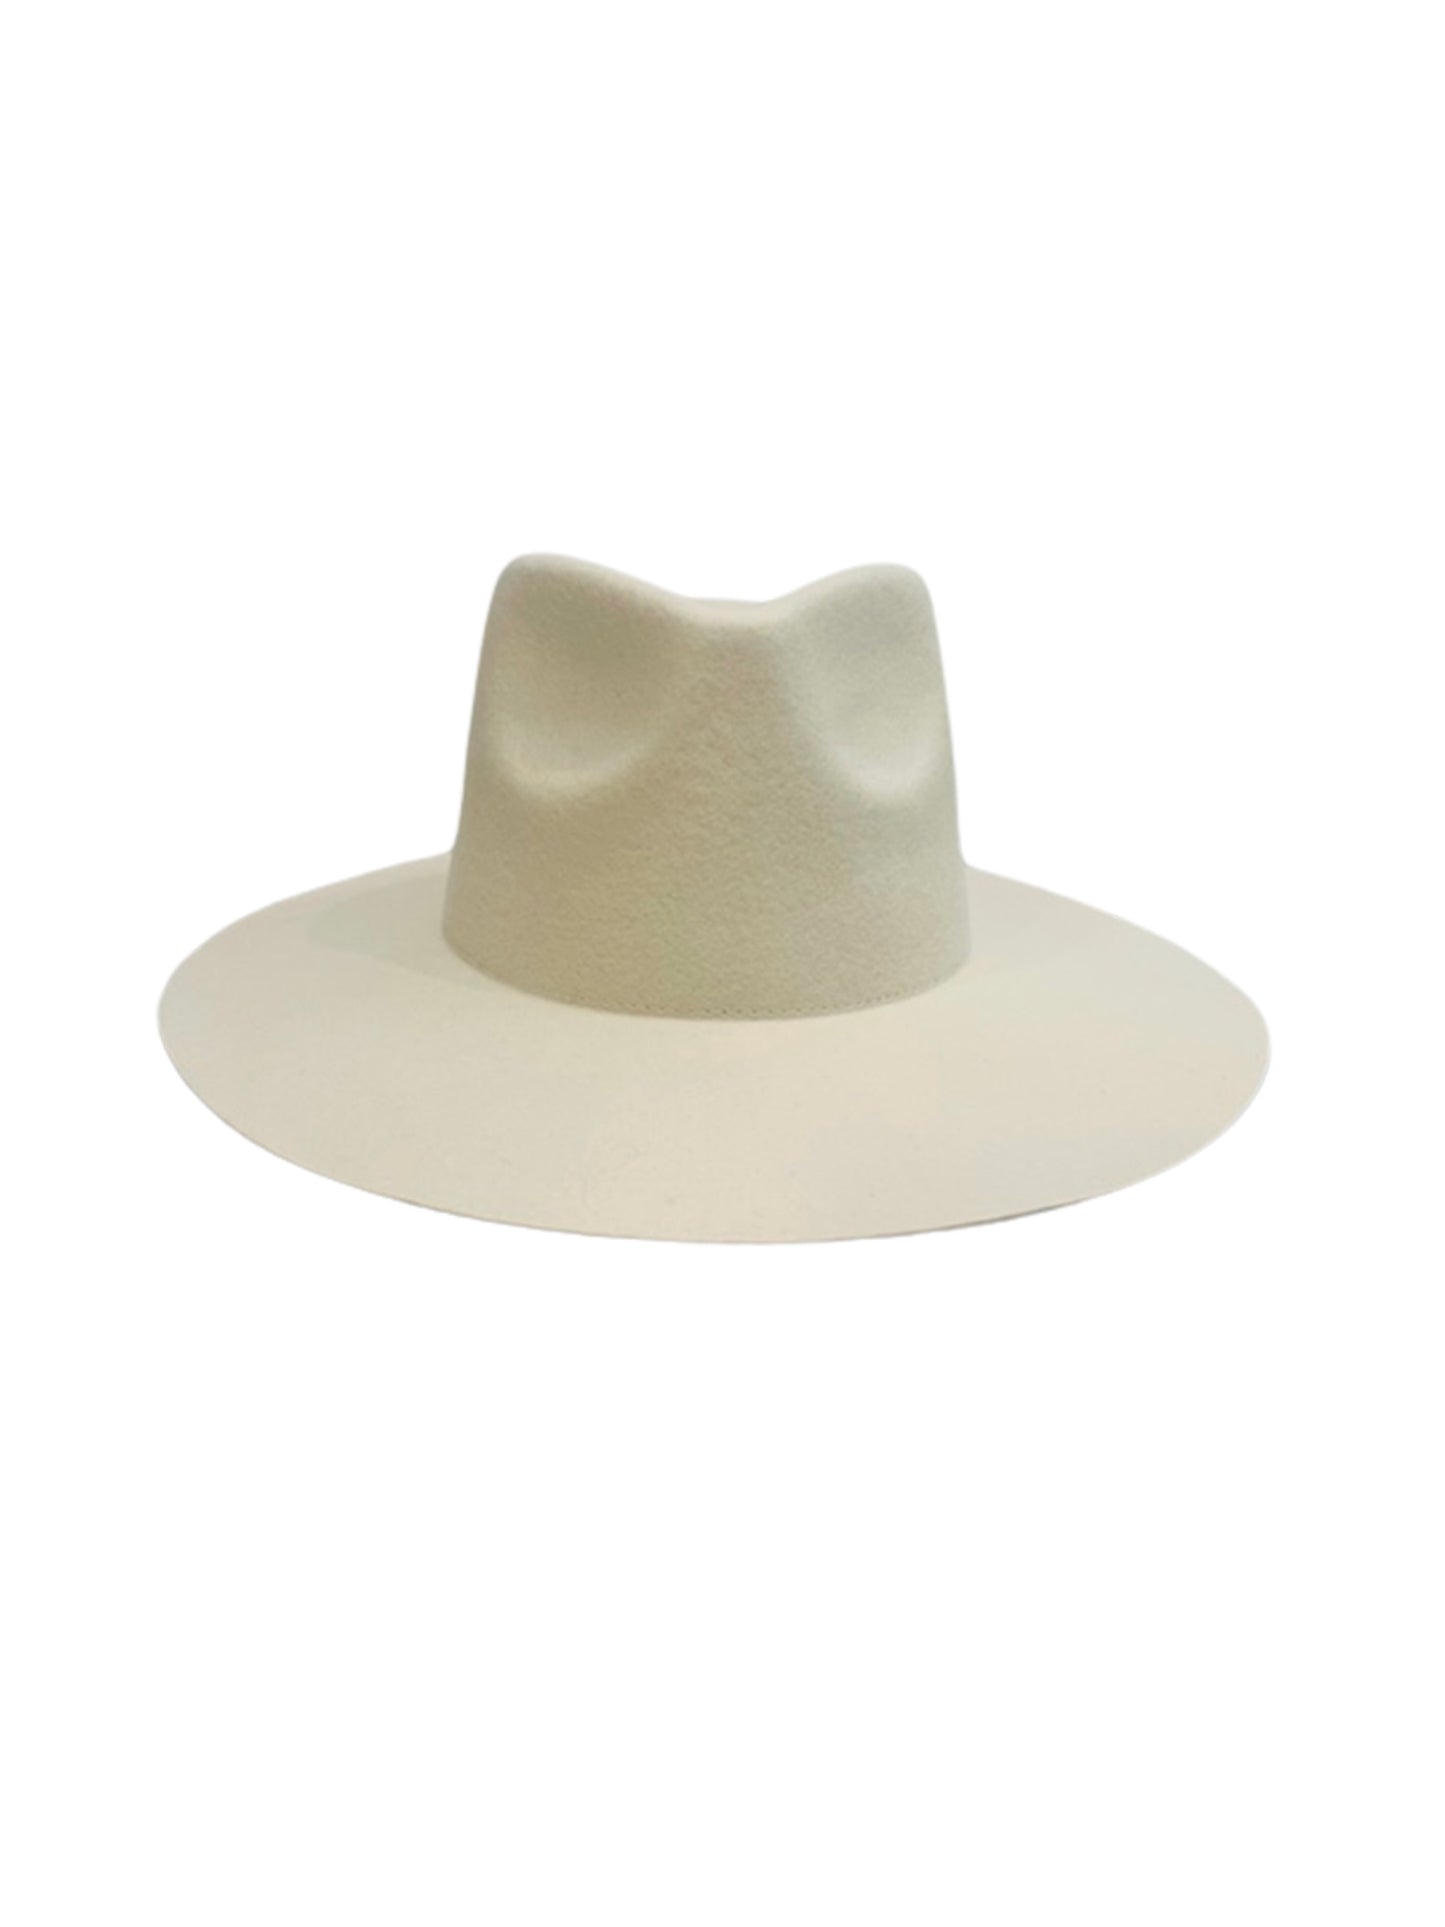 rancher hat ivory front